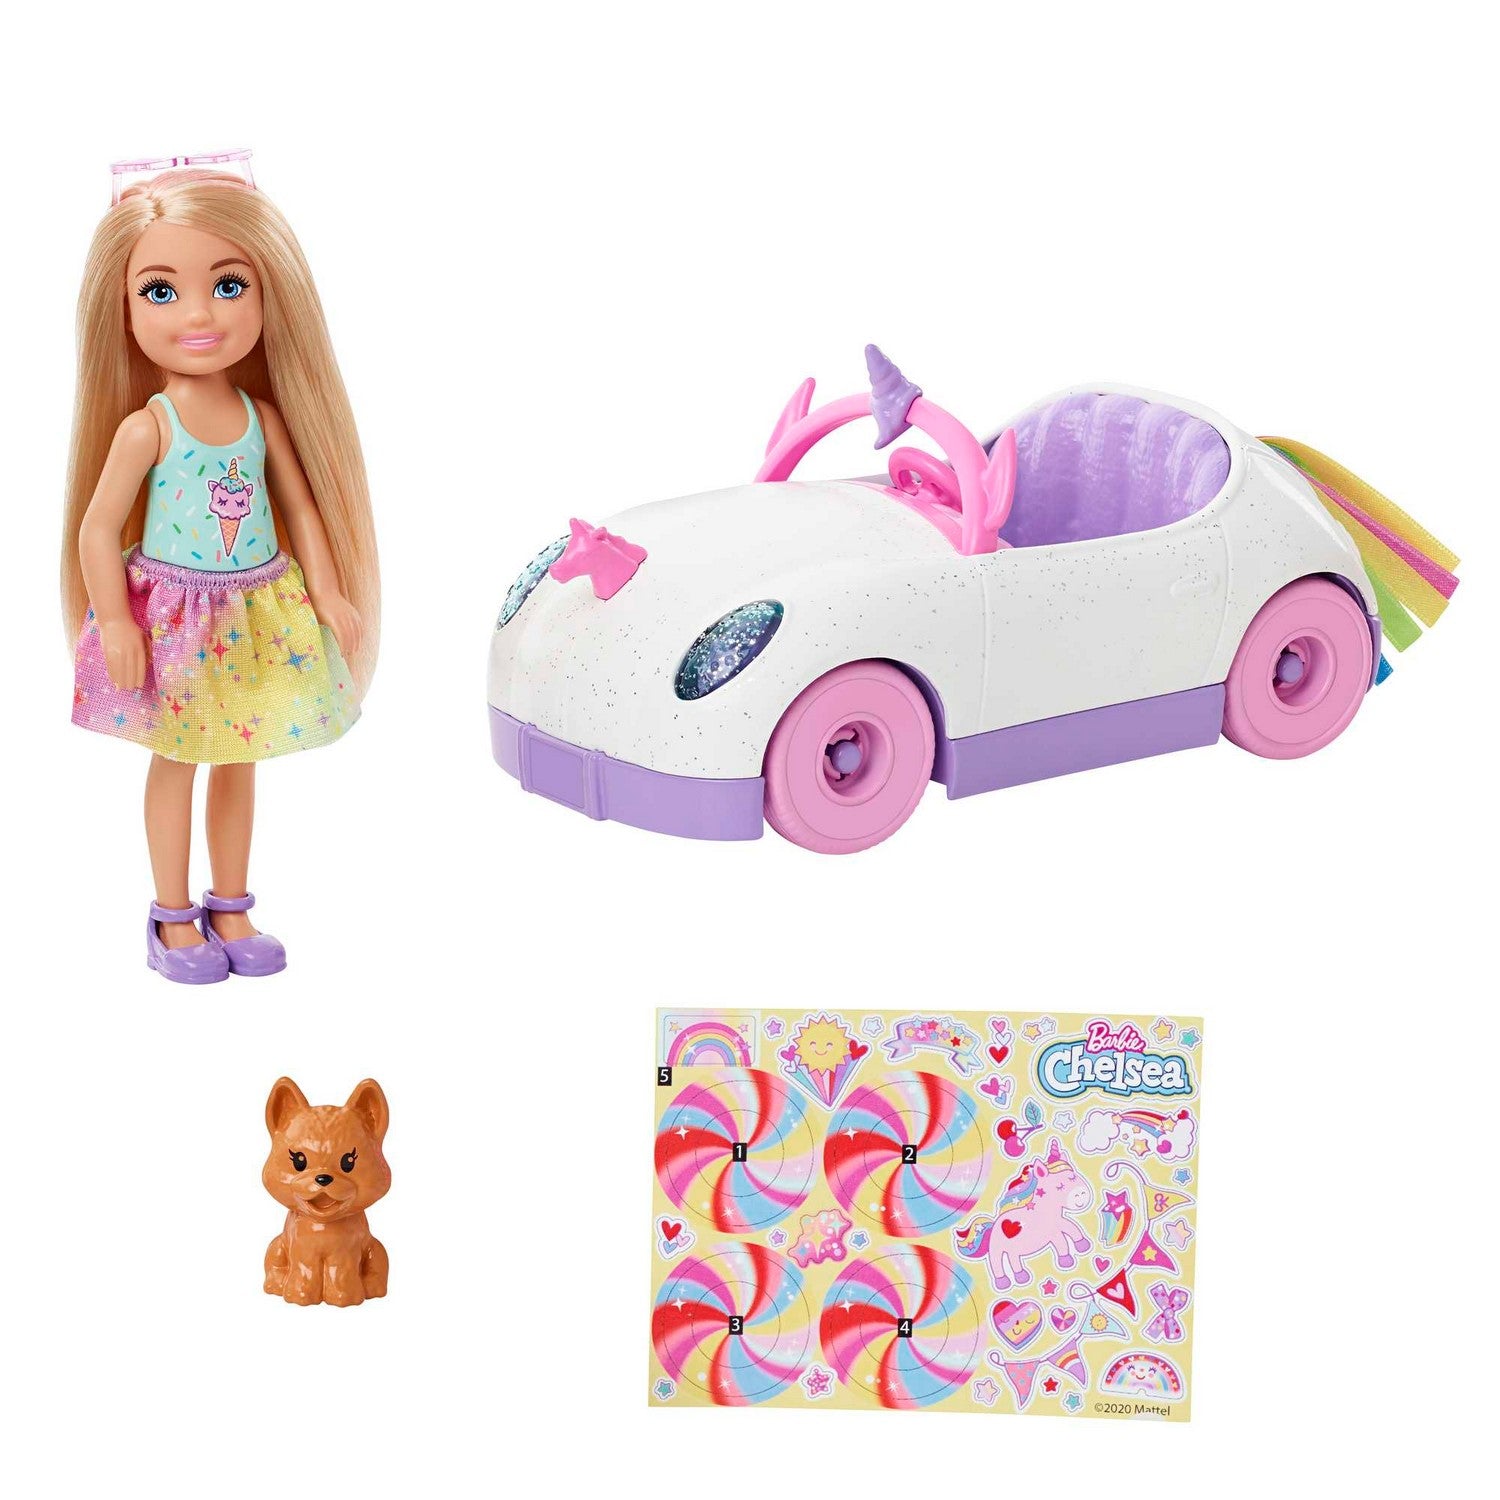 Barbie Chelsea Doll With Unicorn-themed Car Toy